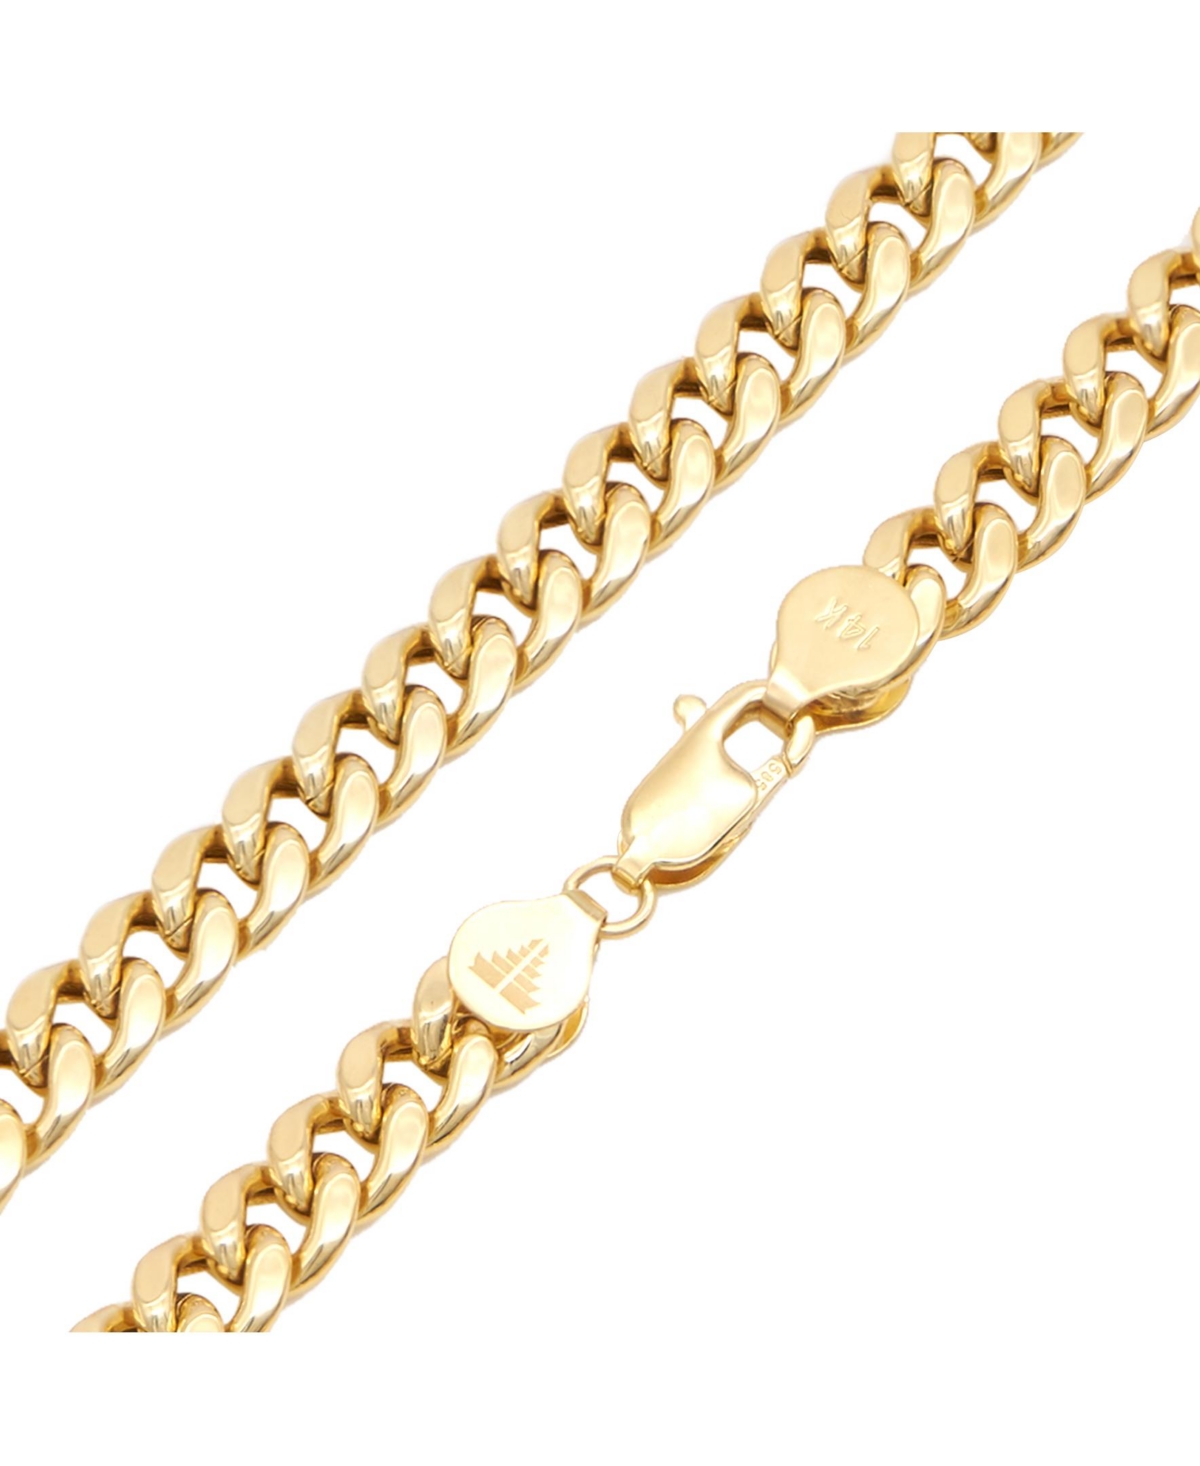 14K Solid Gold 6mm Cuban Chain Bracelet, Hollow-designed, 7 inches, approx. 6.8grams - Gold